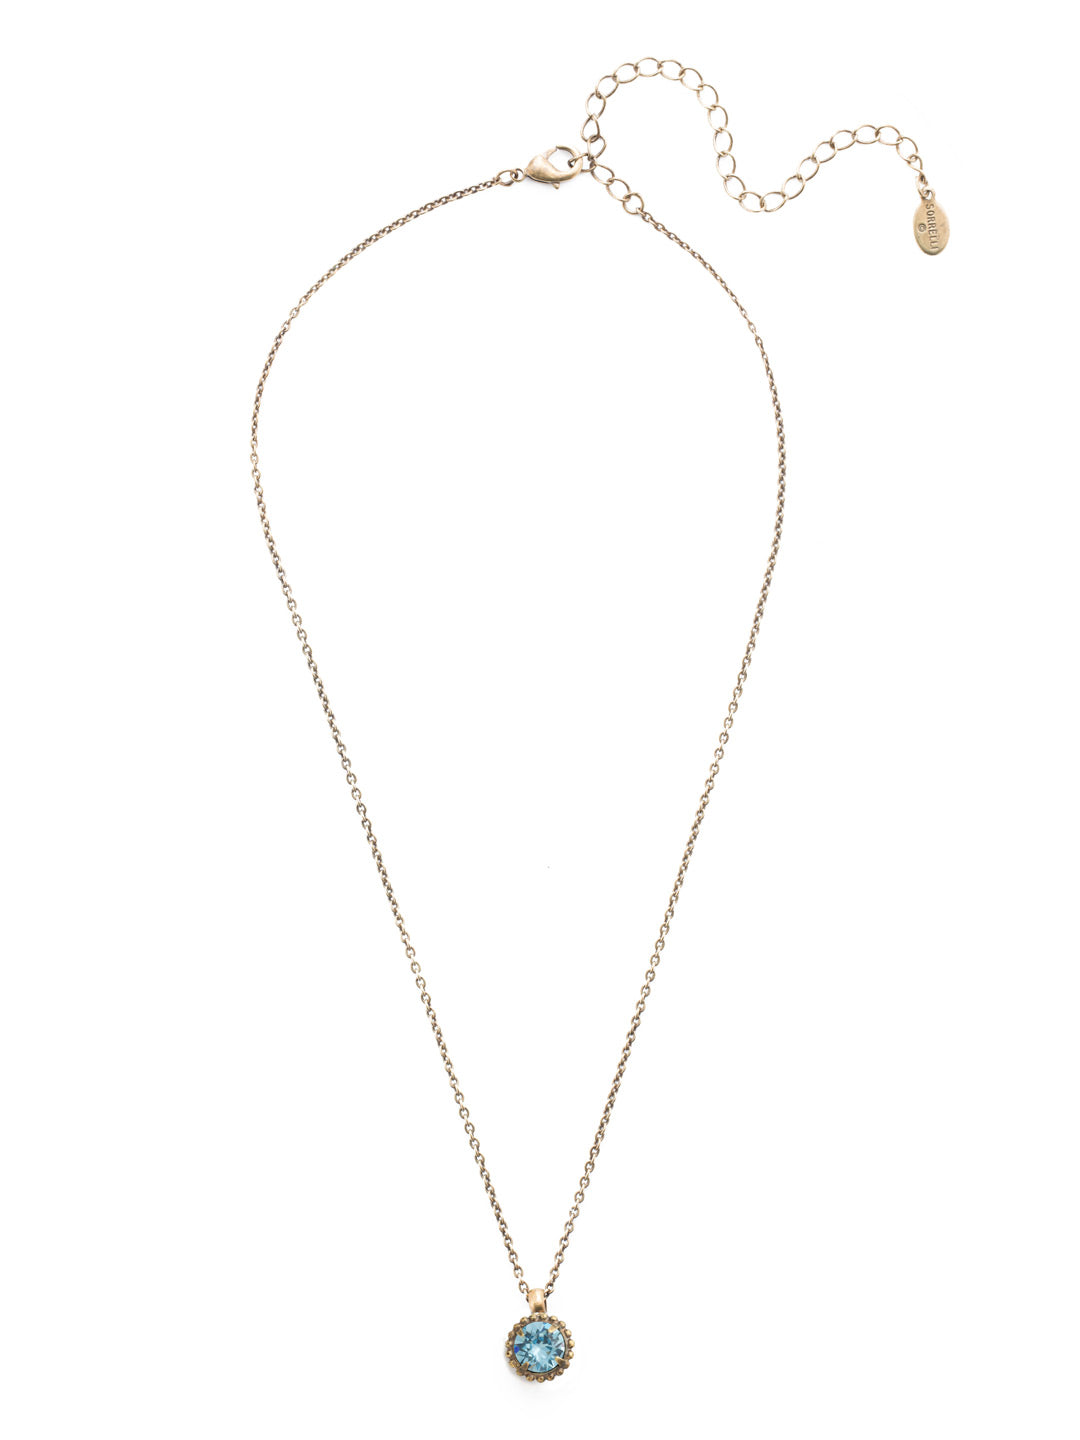 Simplicity Pendant Necklace - NBY38AGAQU - <p>Perfect for any day! The Simplicity Pendant Necklace features a round cut crystal with vintage edging. From Sorrelli's Aquamarine collection in our Antique Gold-tone finish.</p>